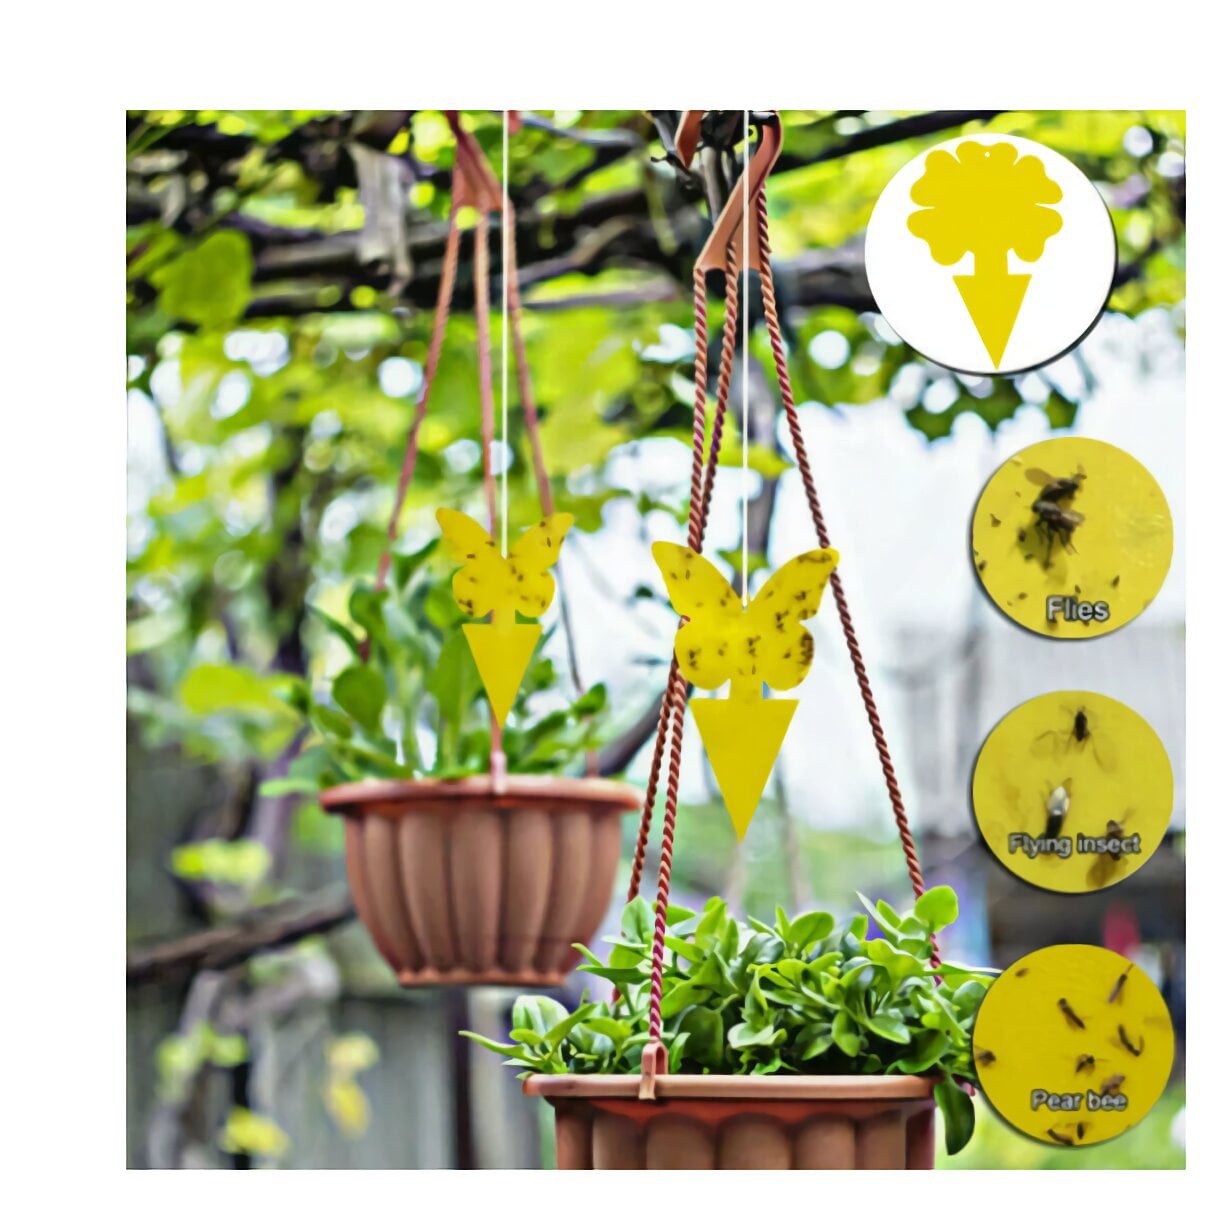 LIGHTSMAX Yellow Sticky Bug Traps for White Flies Mosquitos Fungus